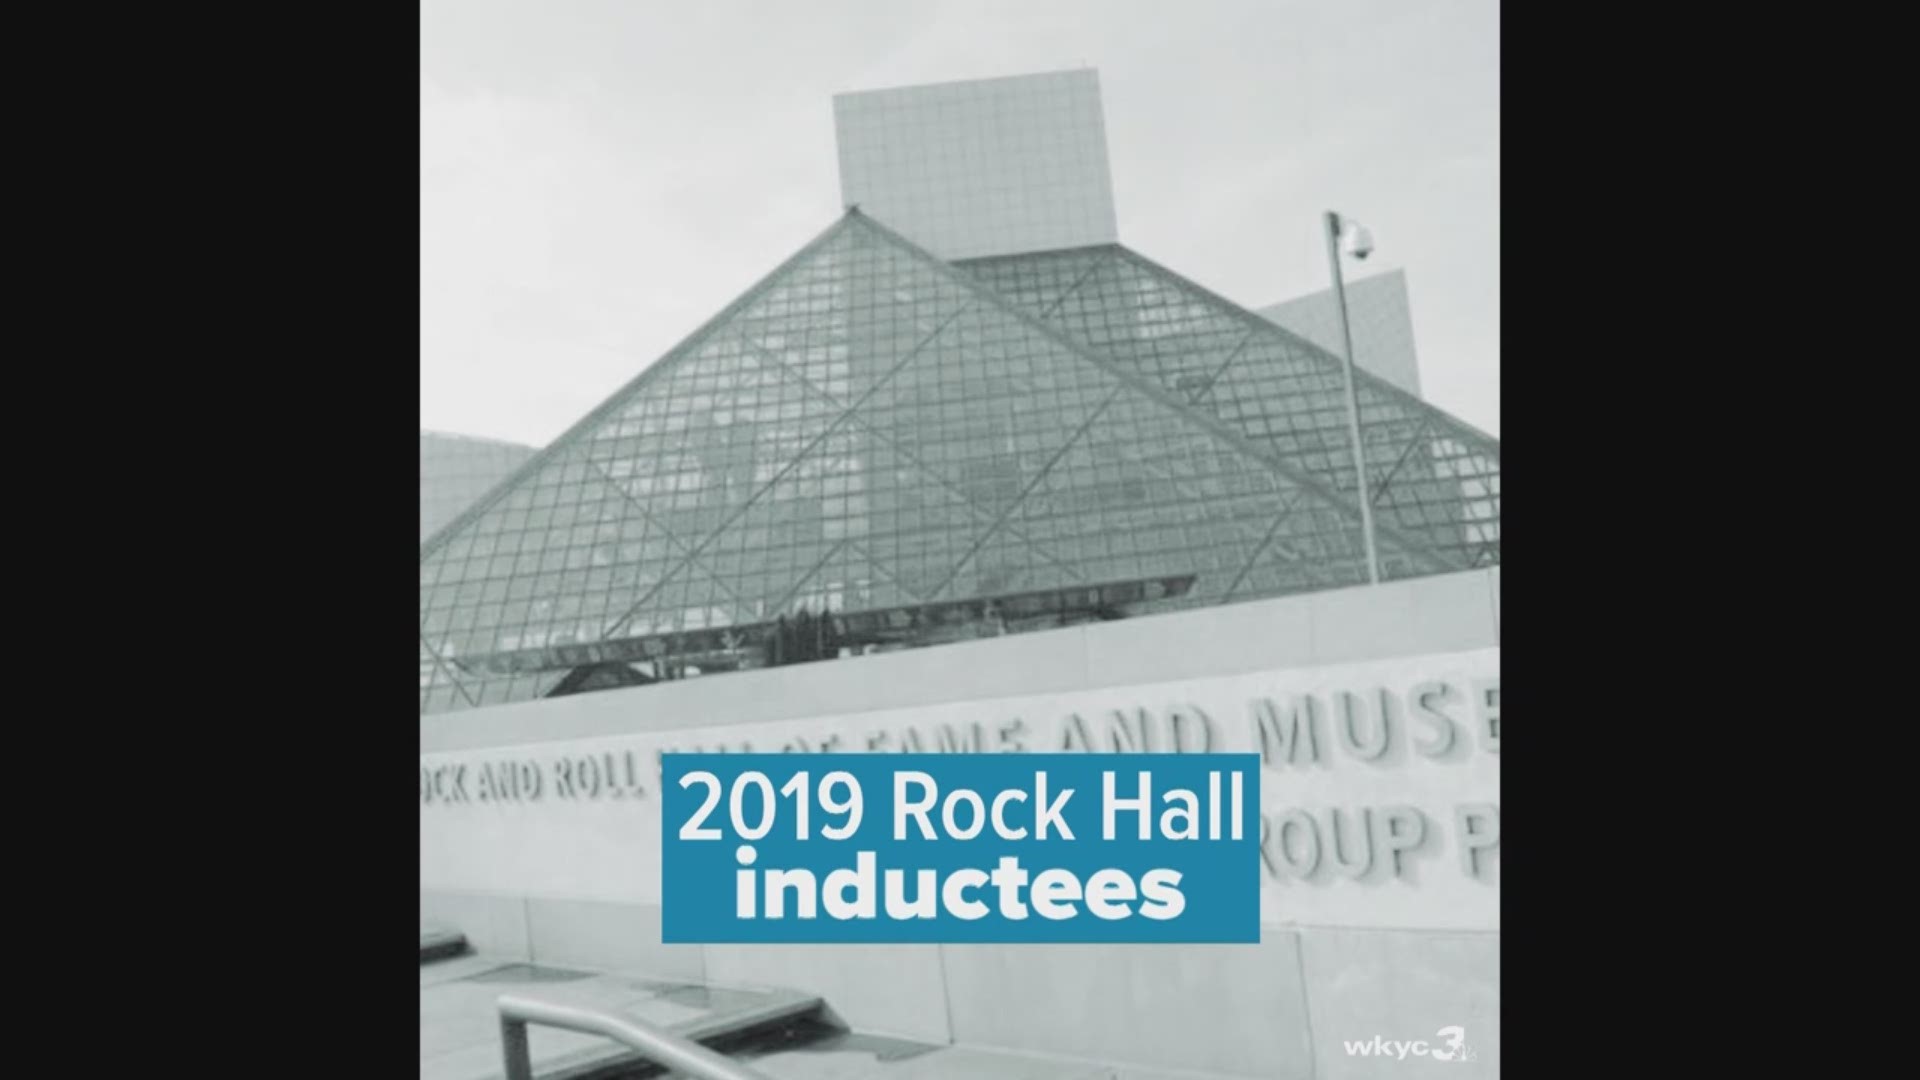 Here are the 2019 inductees to the Rock & Roll Hall of Fame.